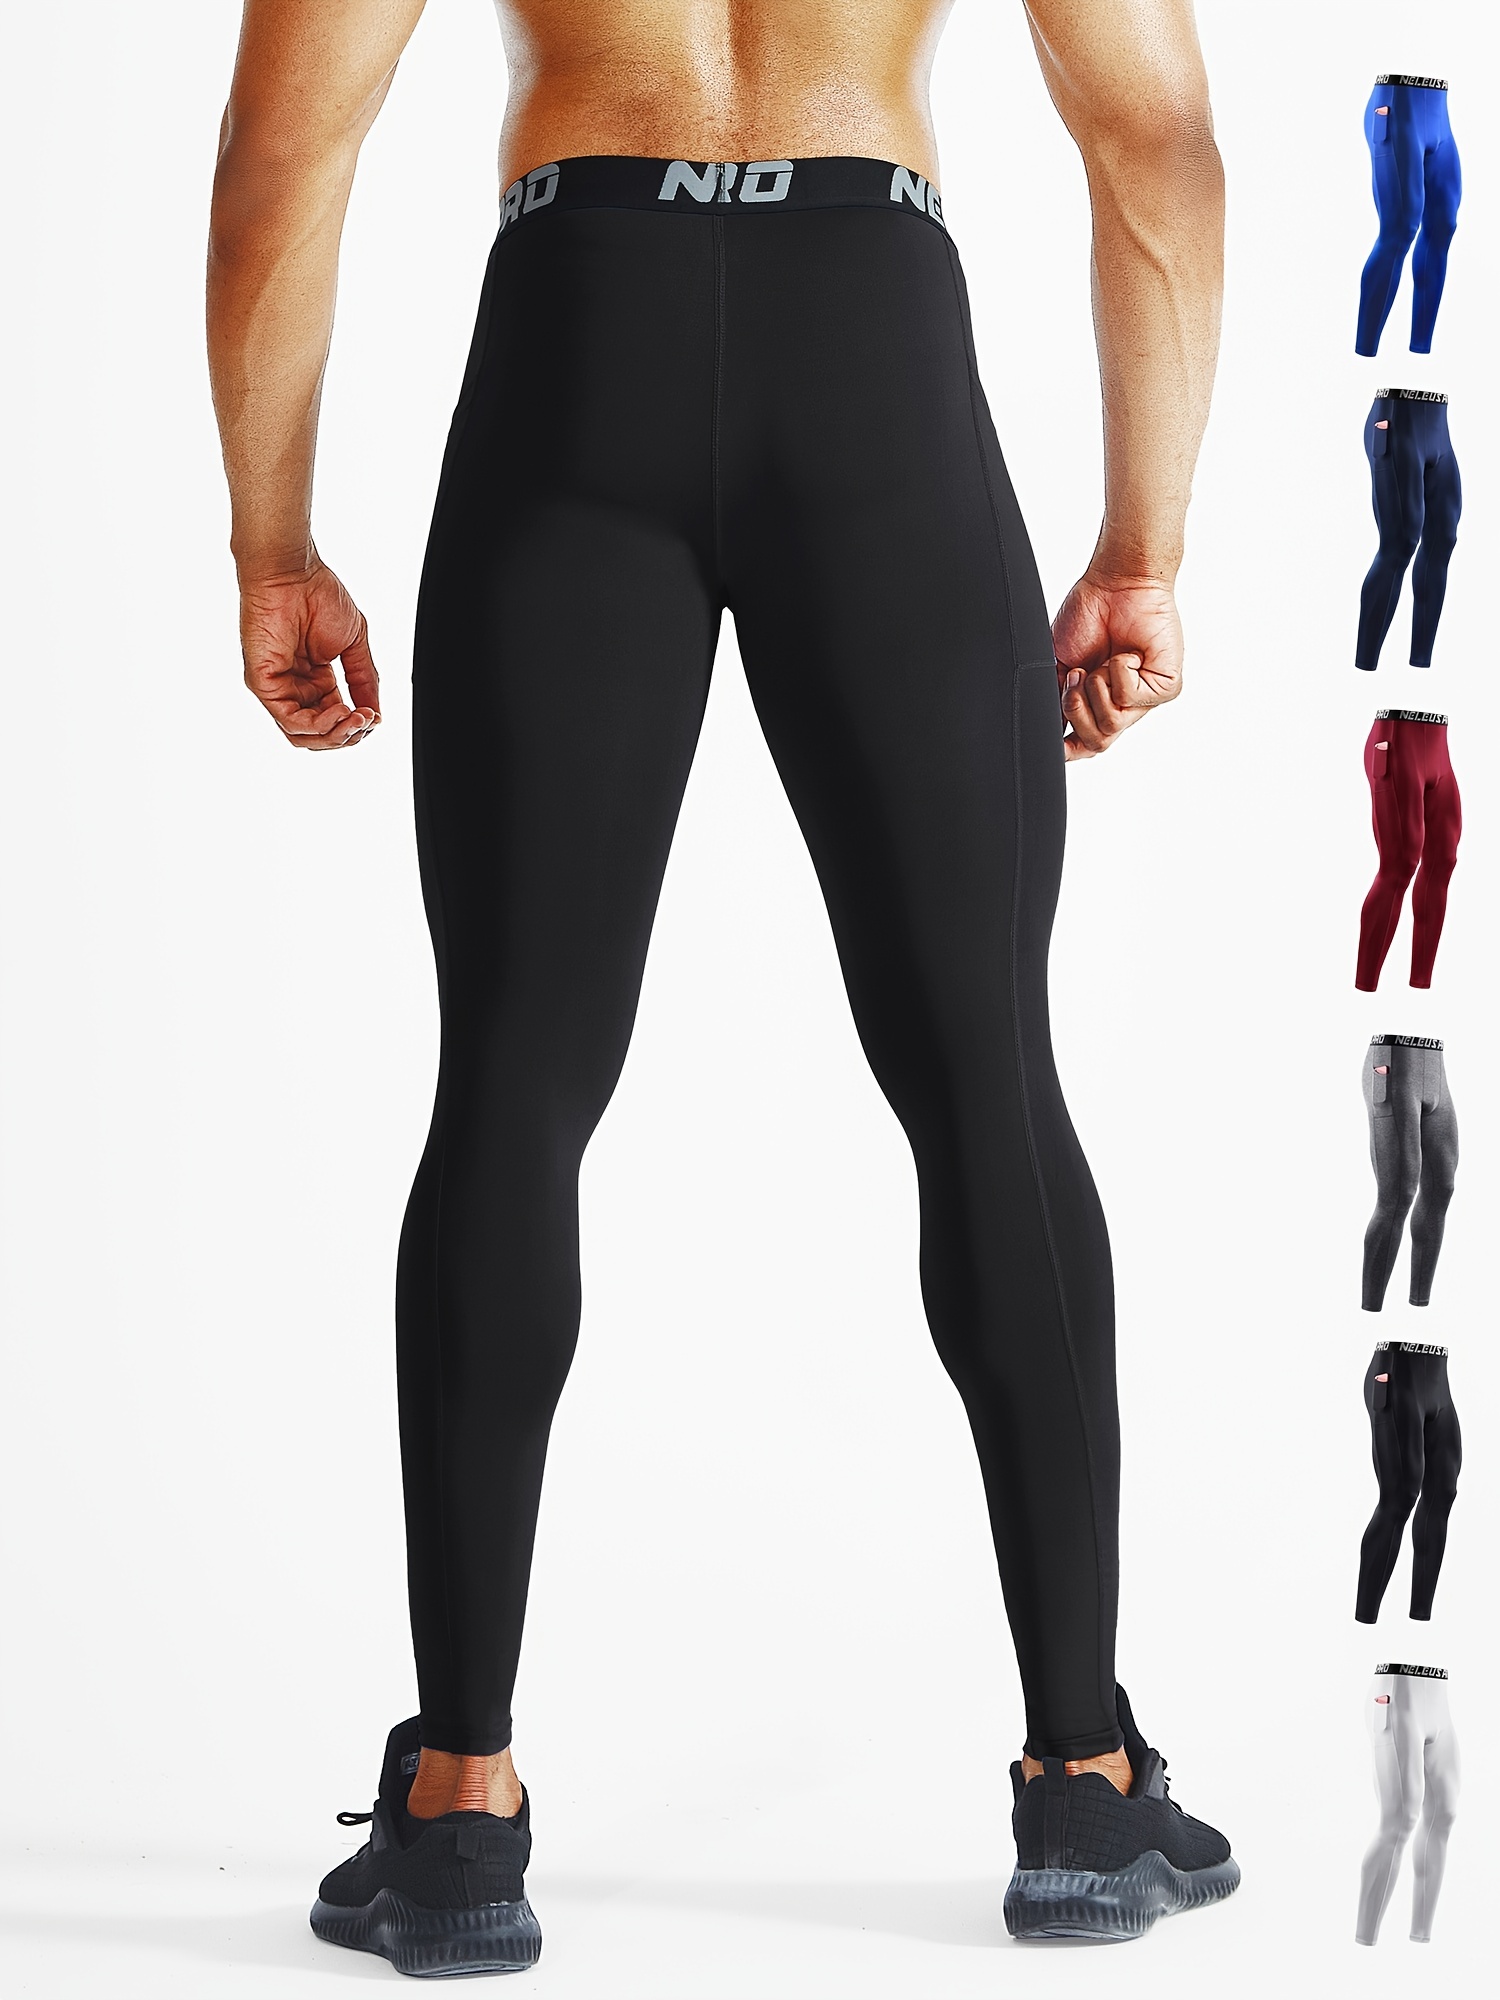 Plus Size Men's Elastic Tights With Pockets, Quick-drying And